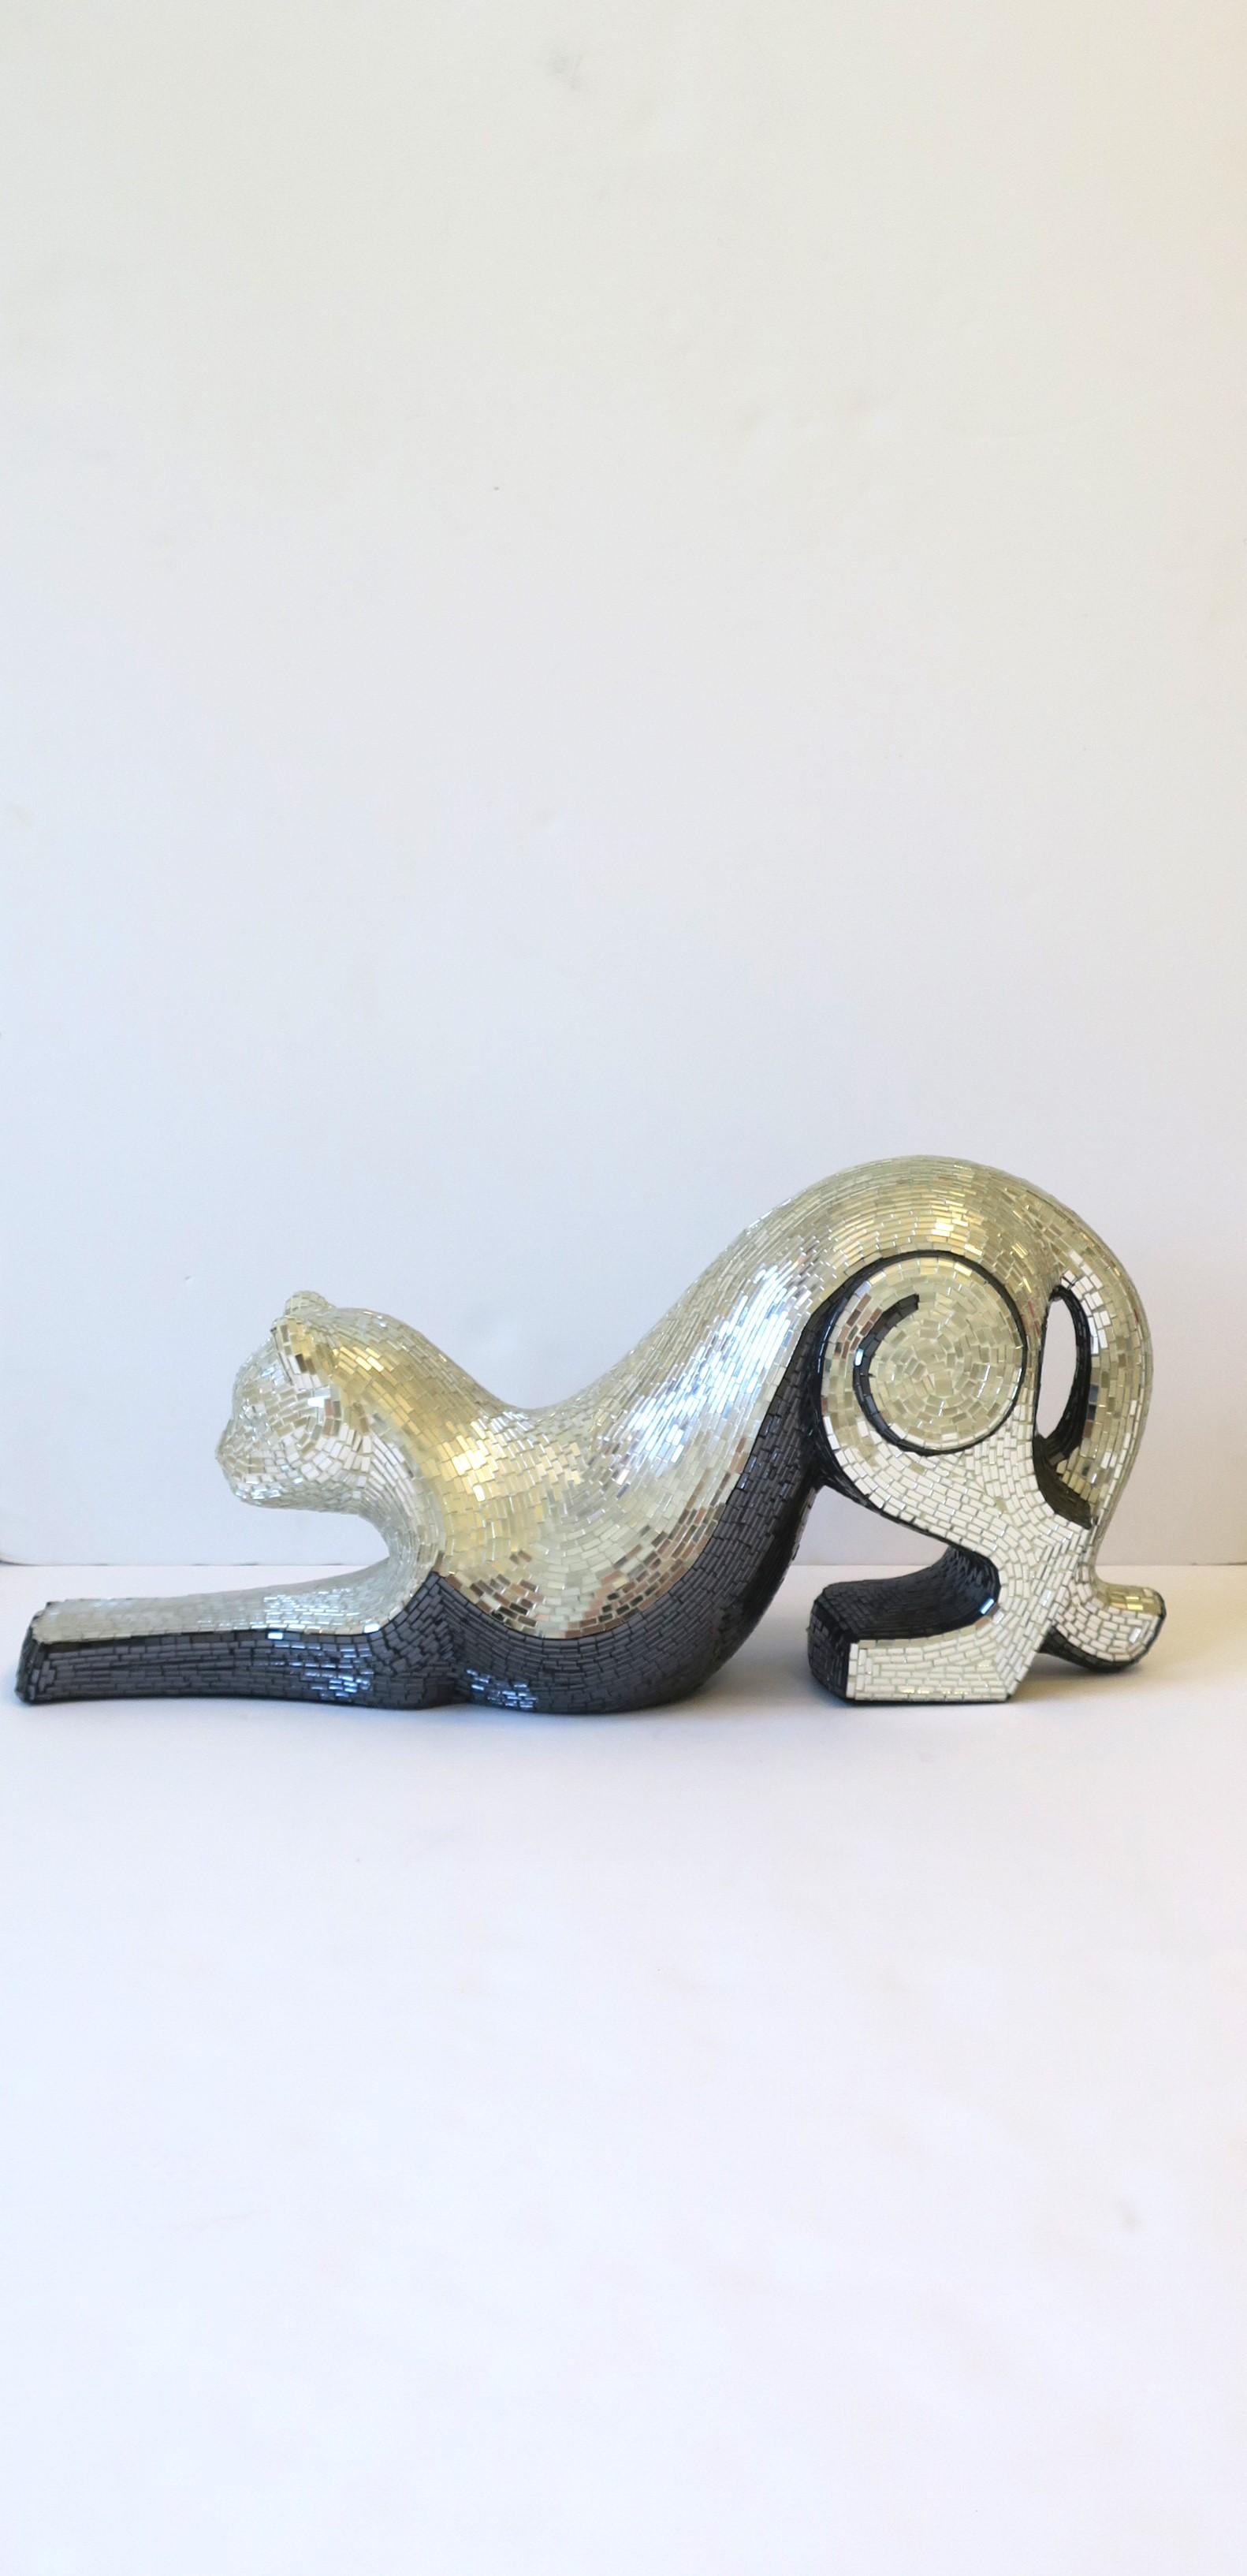 Love a disco ball? Here is a chic '70s Modern mirrored disco Panther cat sculpture by Brazilin artist, Jobi, circa late-20th century, 1970s, Brazil. Panther cat is hand-made and covered in silver and black mirrored glass inlaid mosaic pieces. Cat is